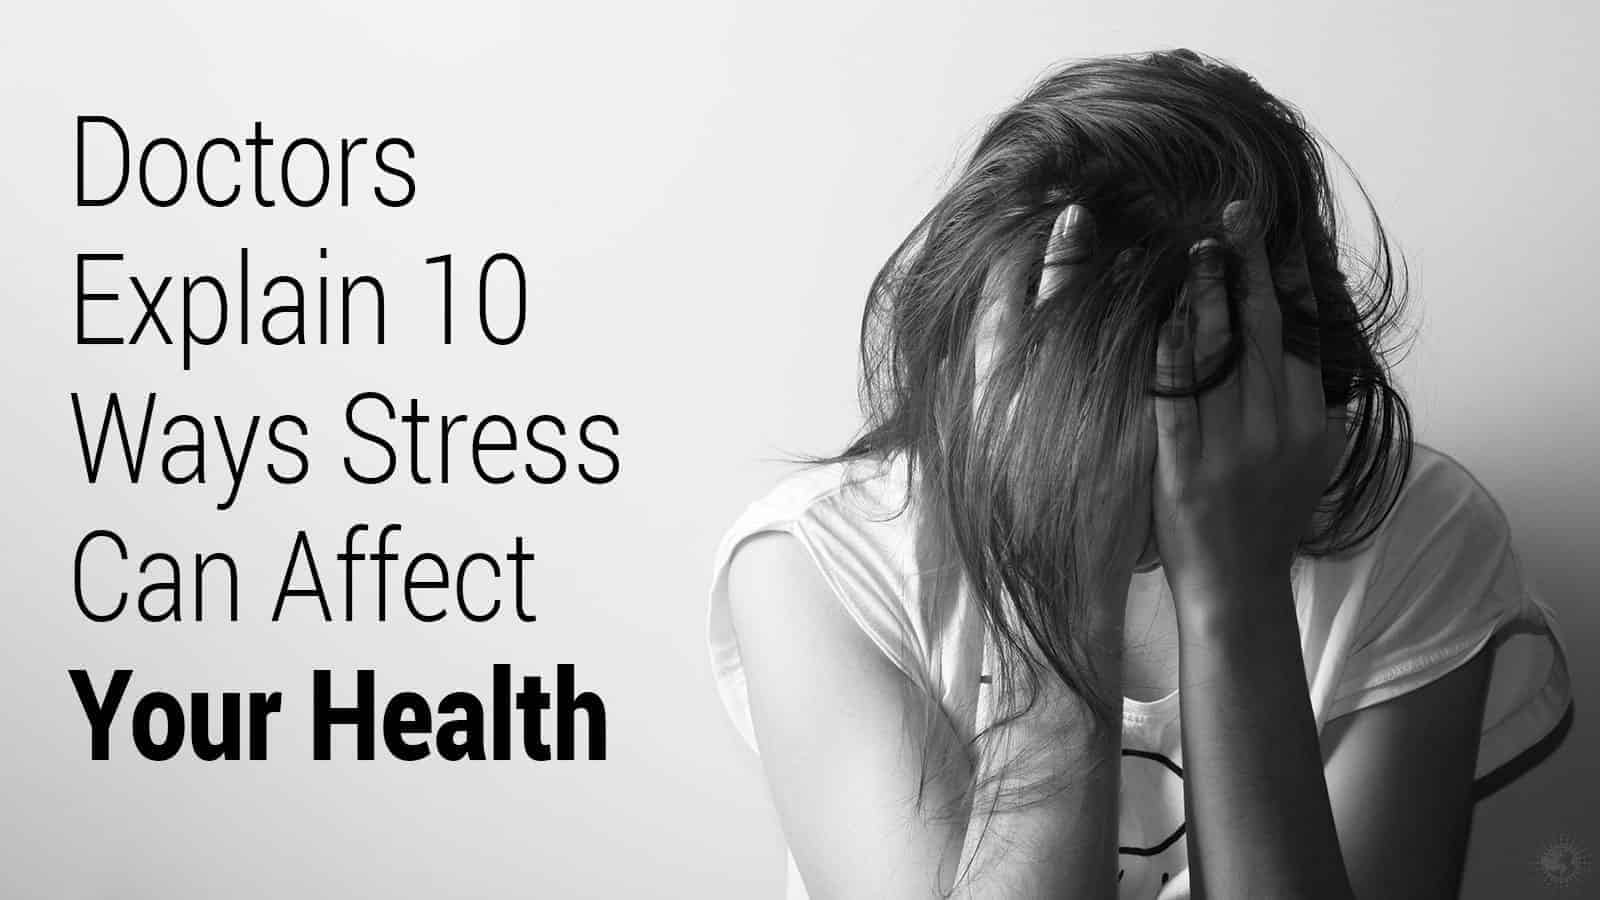 Doctors Explain 10 Ways Stress Can Affect Your Health